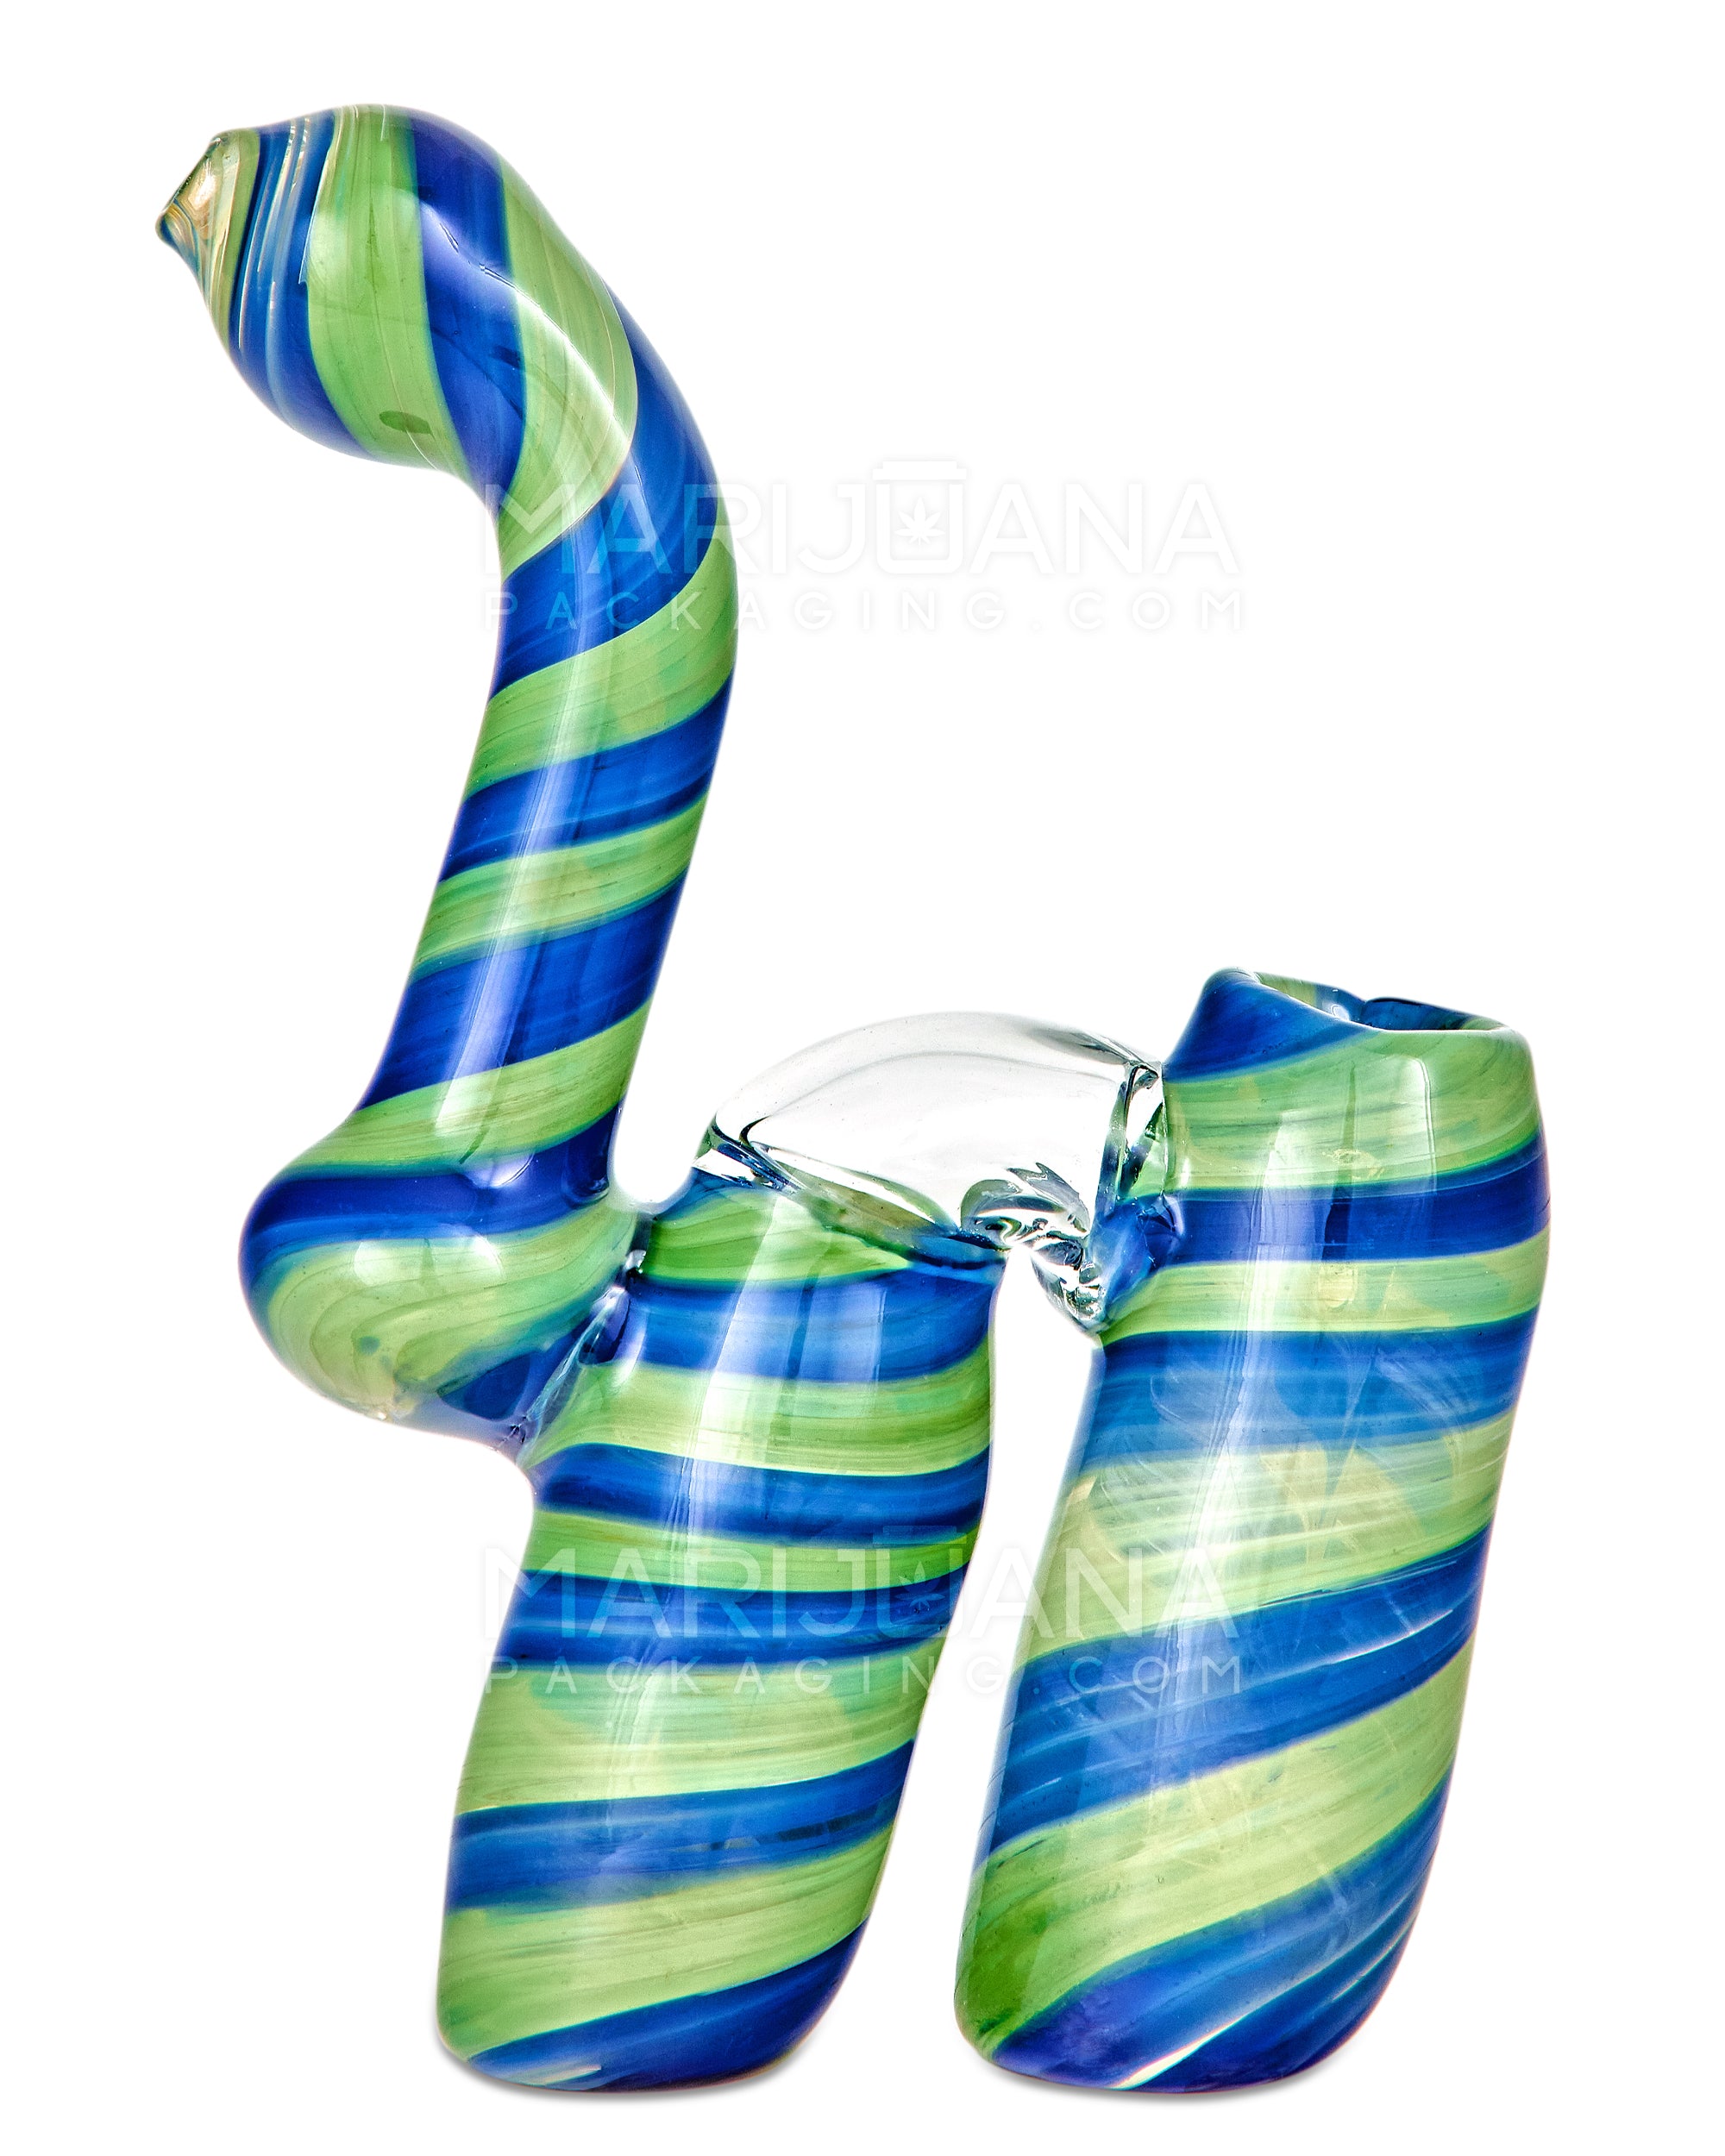 Spiral Double Chamber Bubbler | 6.5in Tall - Glass - Blue & Green - 1